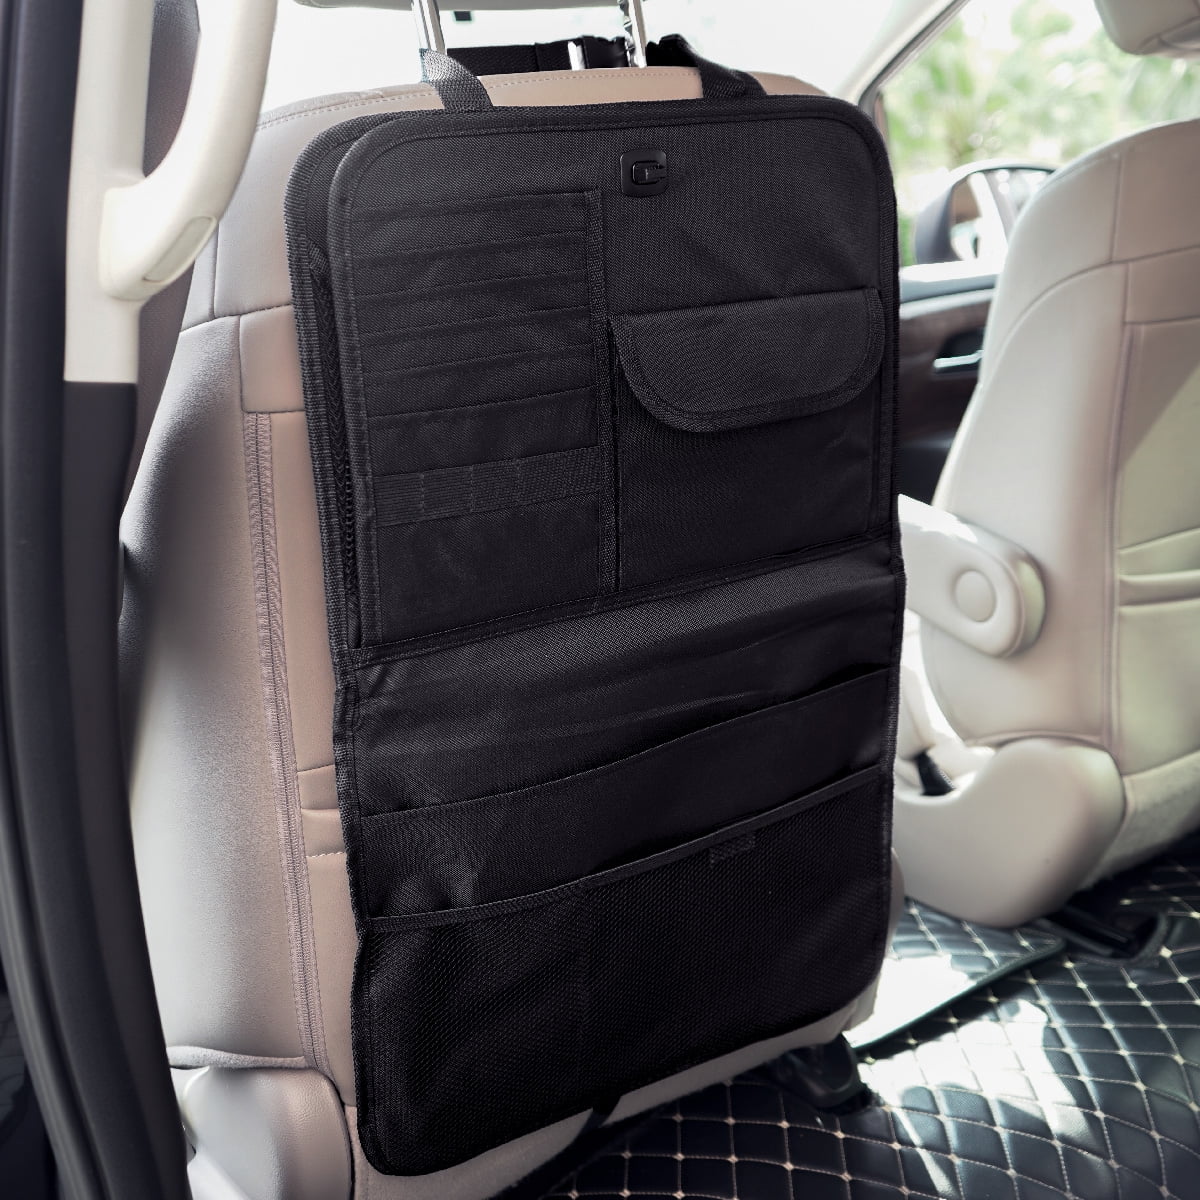 Car Back Seat Organize Storage Hanging Portable Carry Roll Case Pouch Tools Bag 